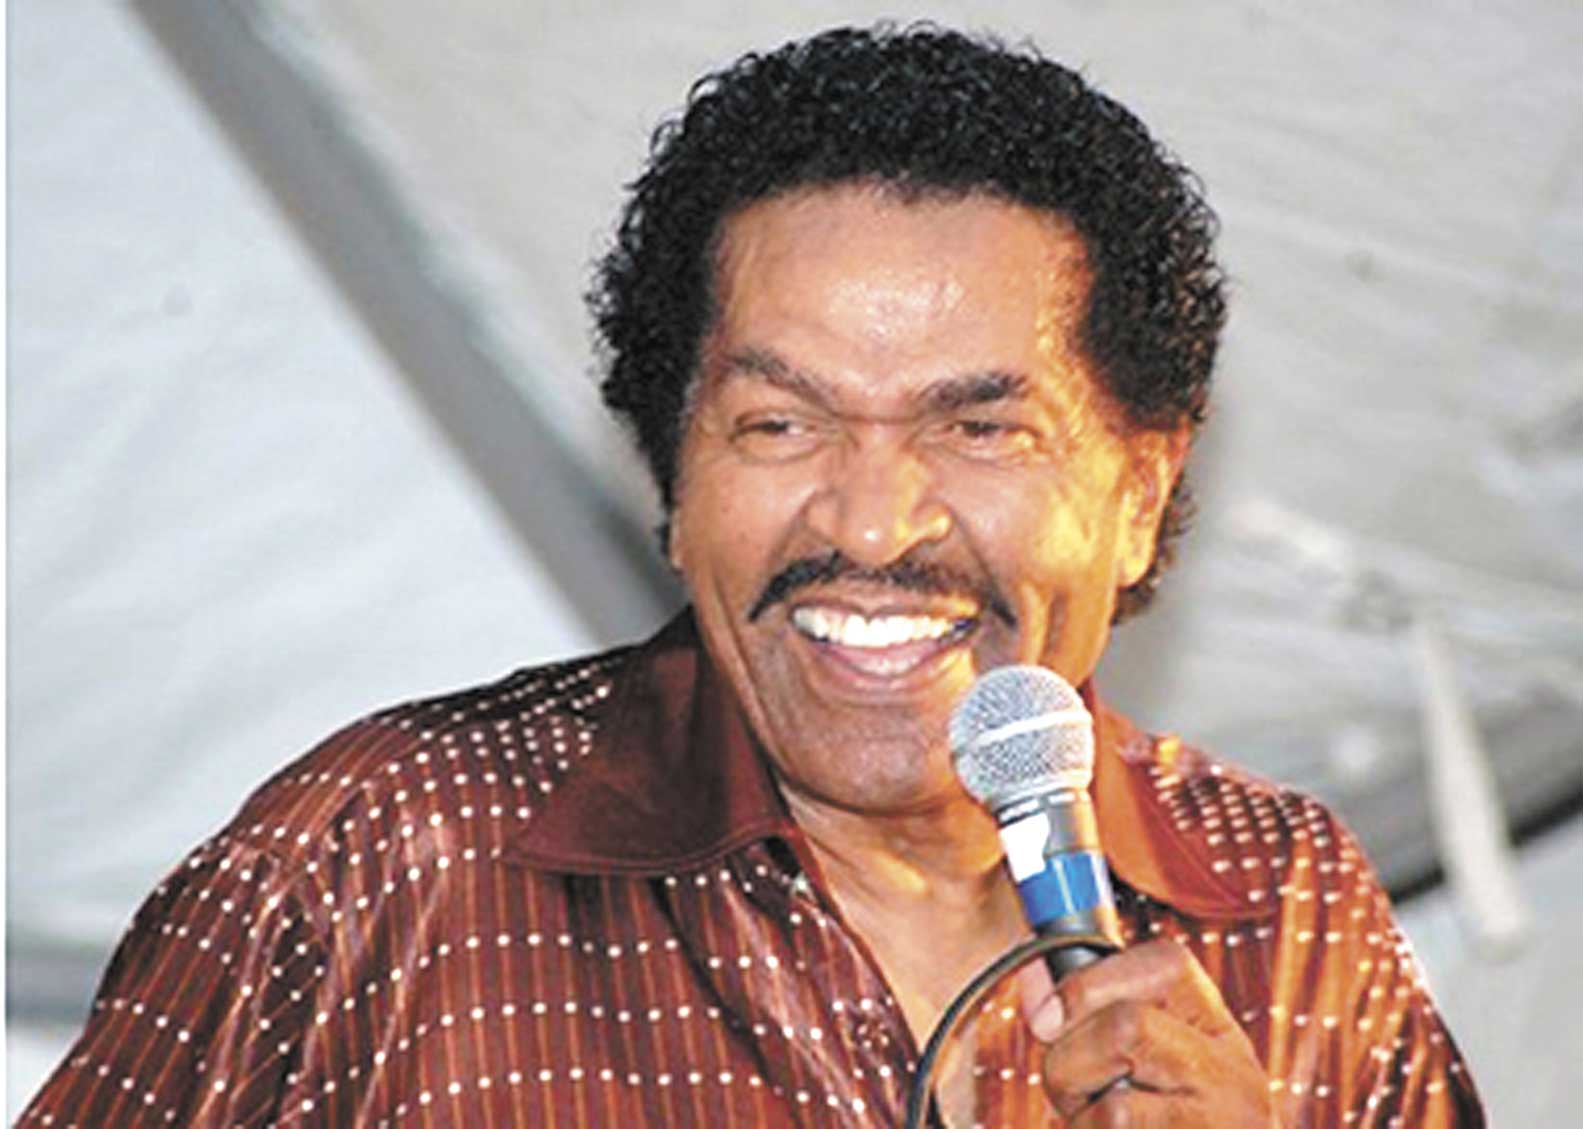 bobby rush lived blues. decades on